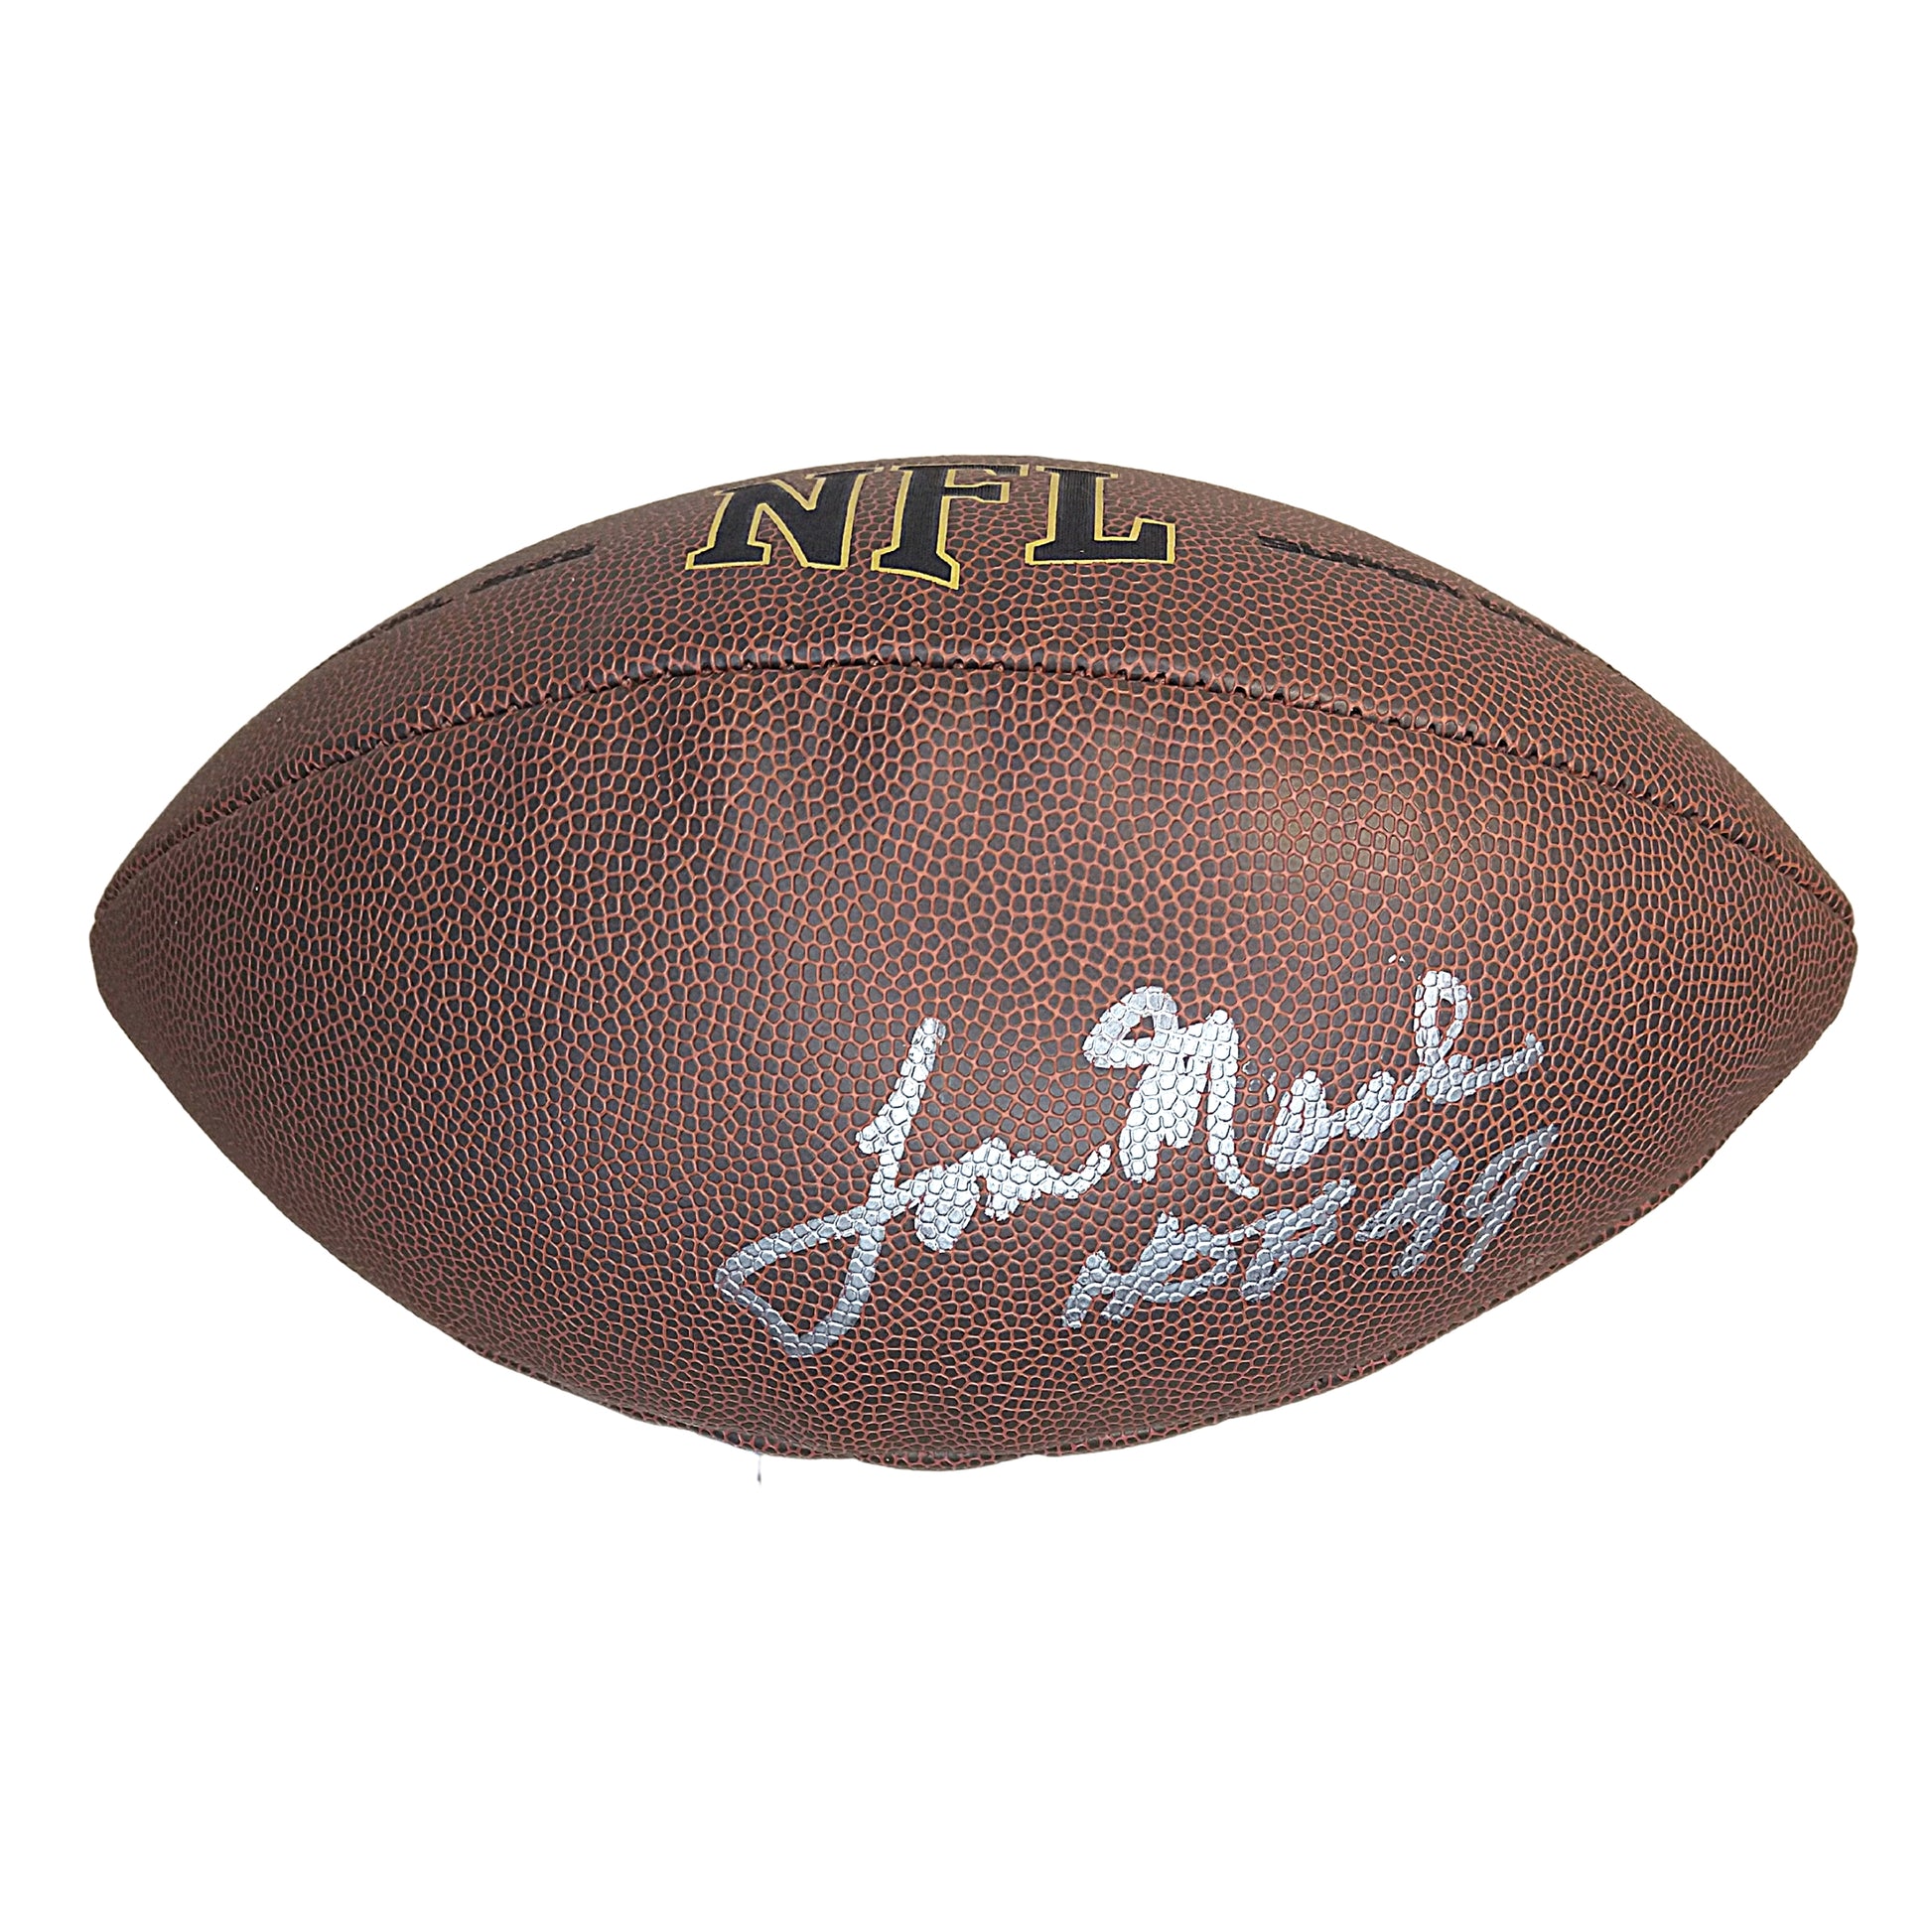 Footballs- Autographed- Tom Mack Signed NFL Wilson Composite Super Grip Football- Los Angeles Rams- Michigan Wolverines- Proof Photo- Beckett BAS Authentication- 102